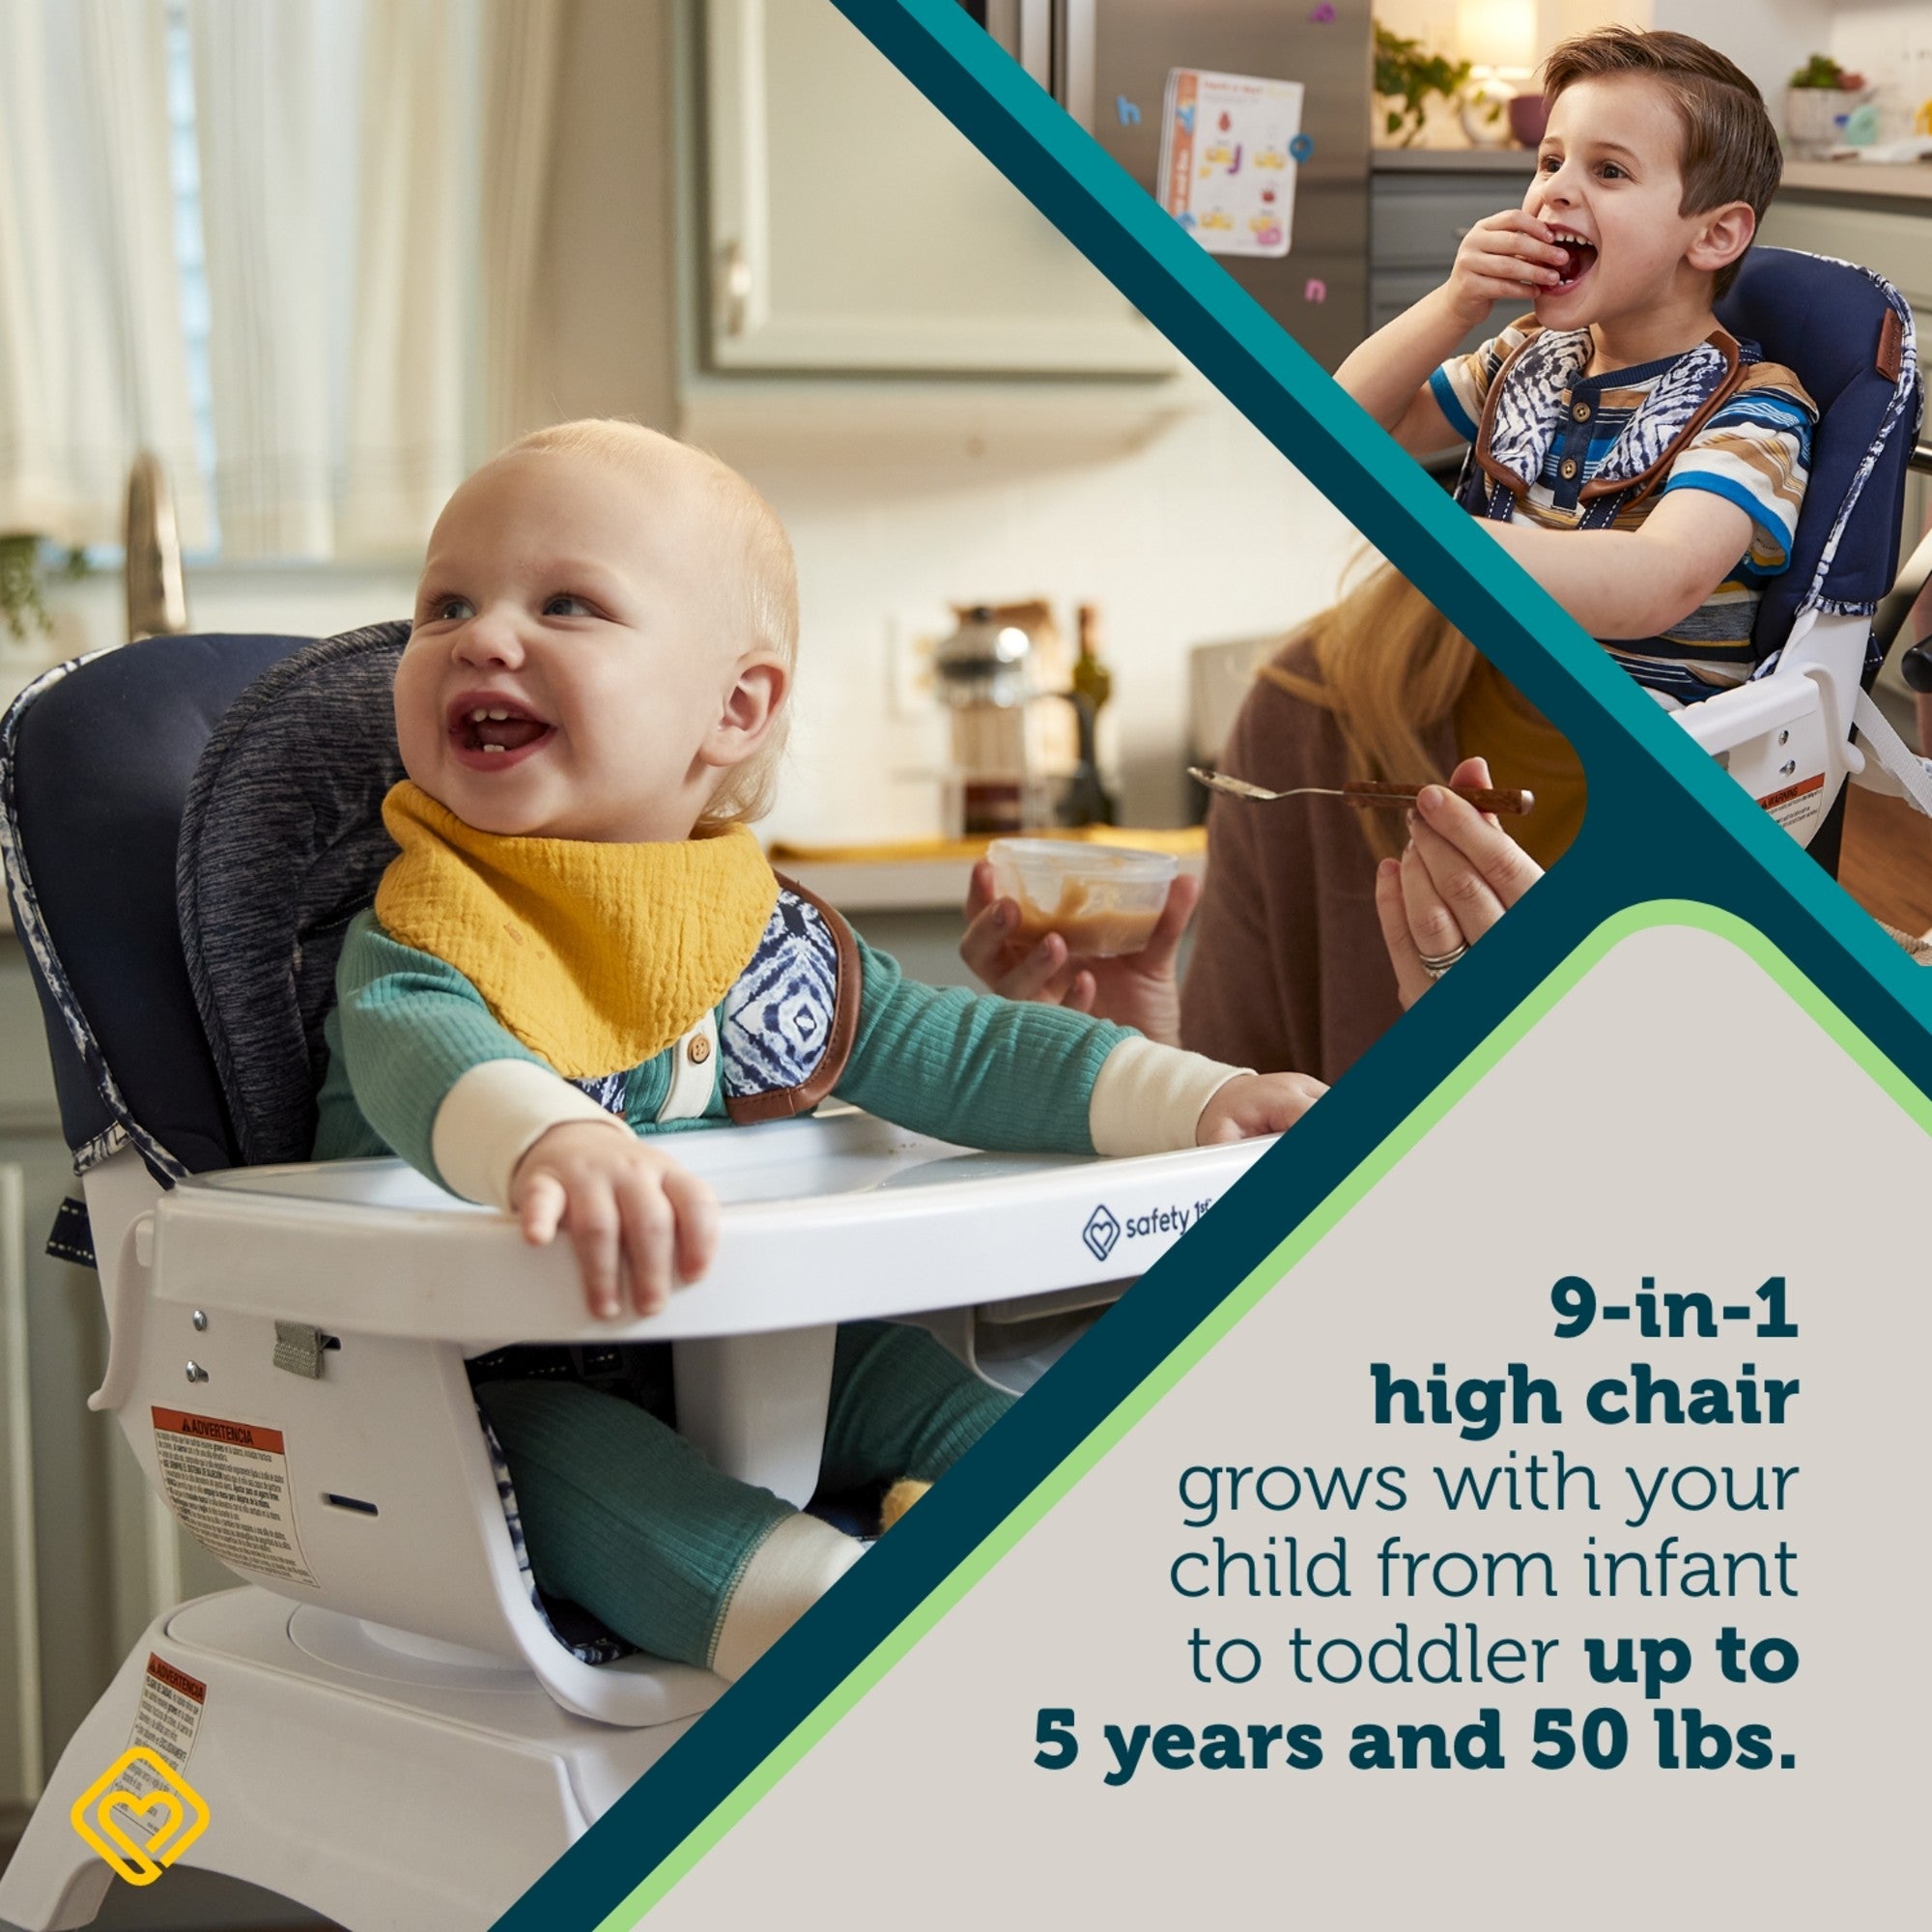 Grow and Go™ Rotating High Chair - 9-in-1 high chair grows with your child from infant to toddler up to 5 years and 50 lbs.